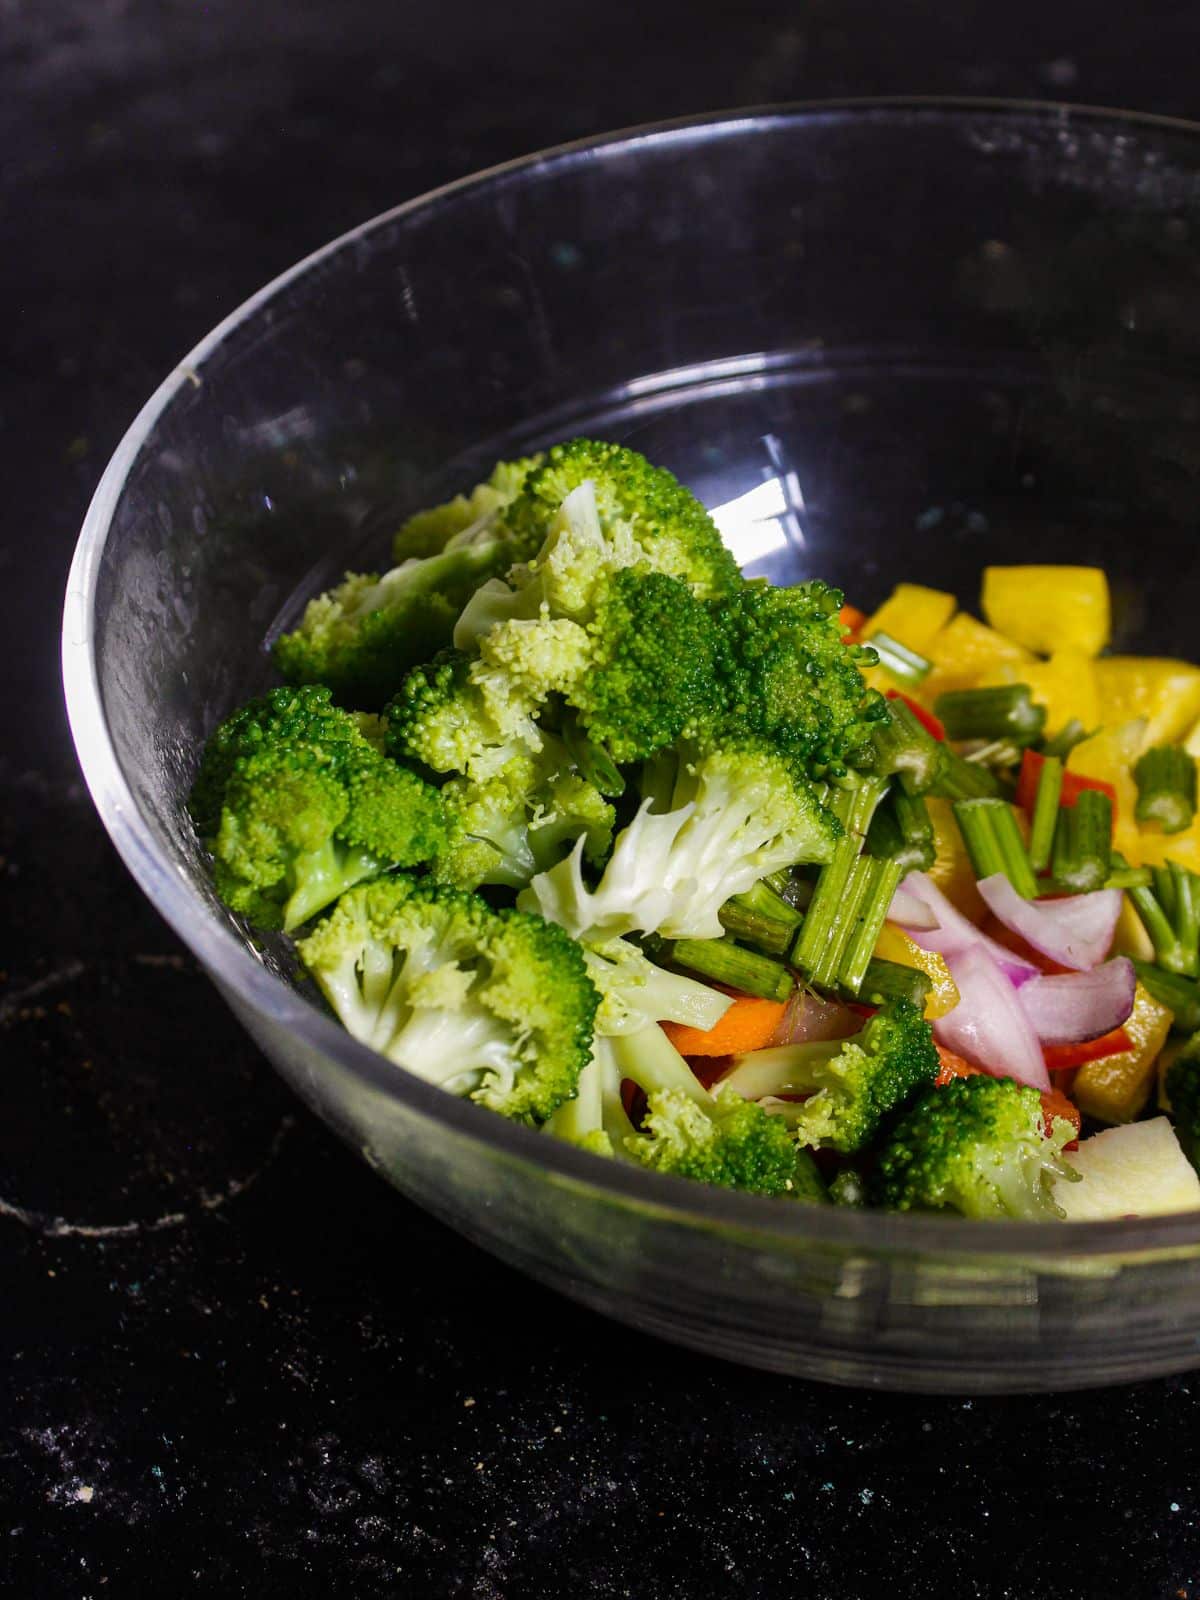 Add broccoli pieces into the bowl 